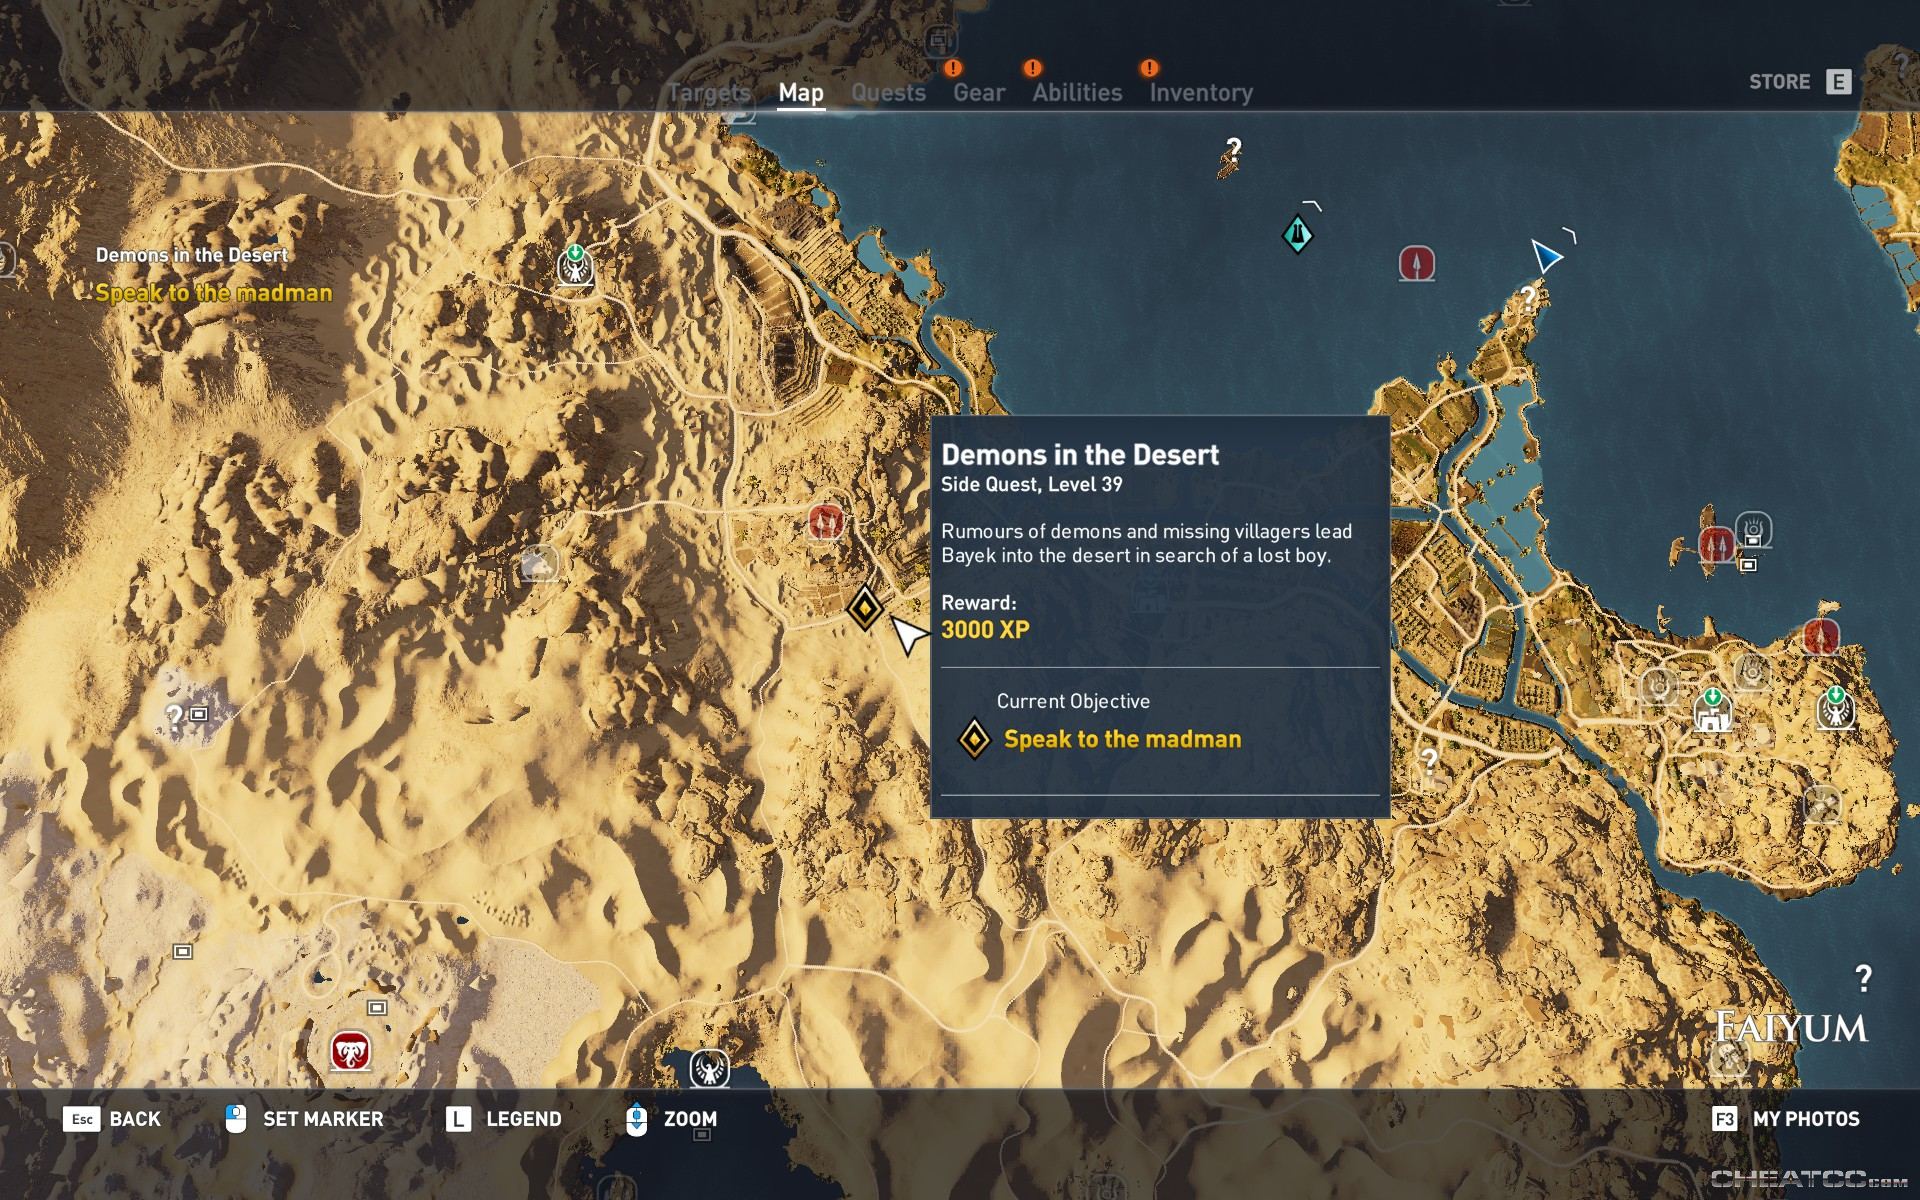 Assassin's Creed: Origins Guide & Walkthrough - Fighting for Faiyum (Side  Quest)